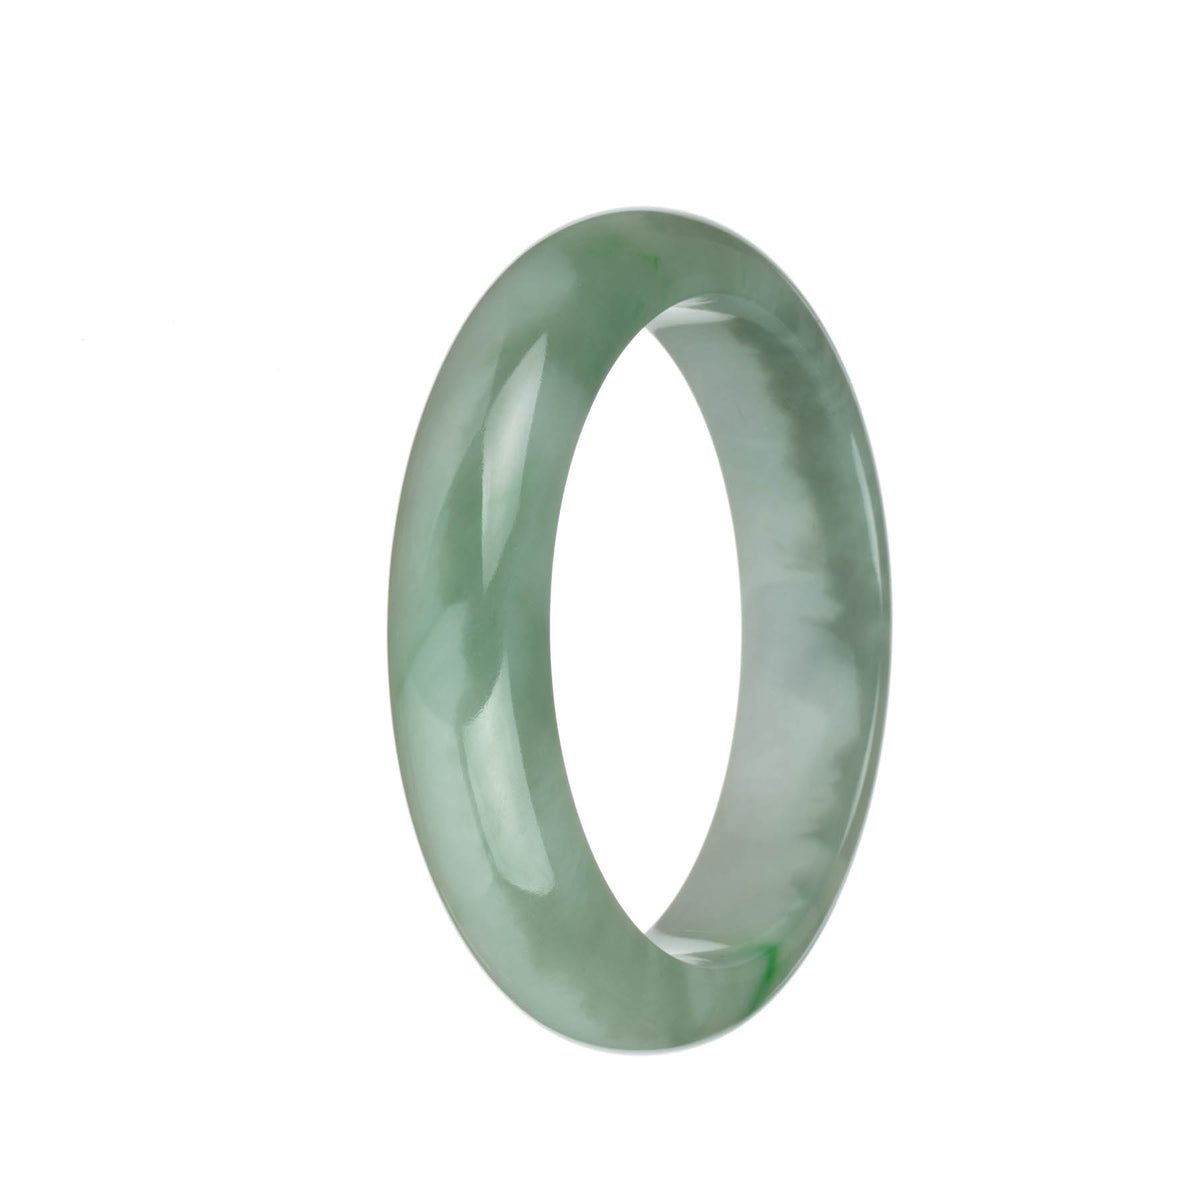 Real Grade A Green and White with Emerald Green Patterns Jadeite Jade Bangle - 63mm Half Moon